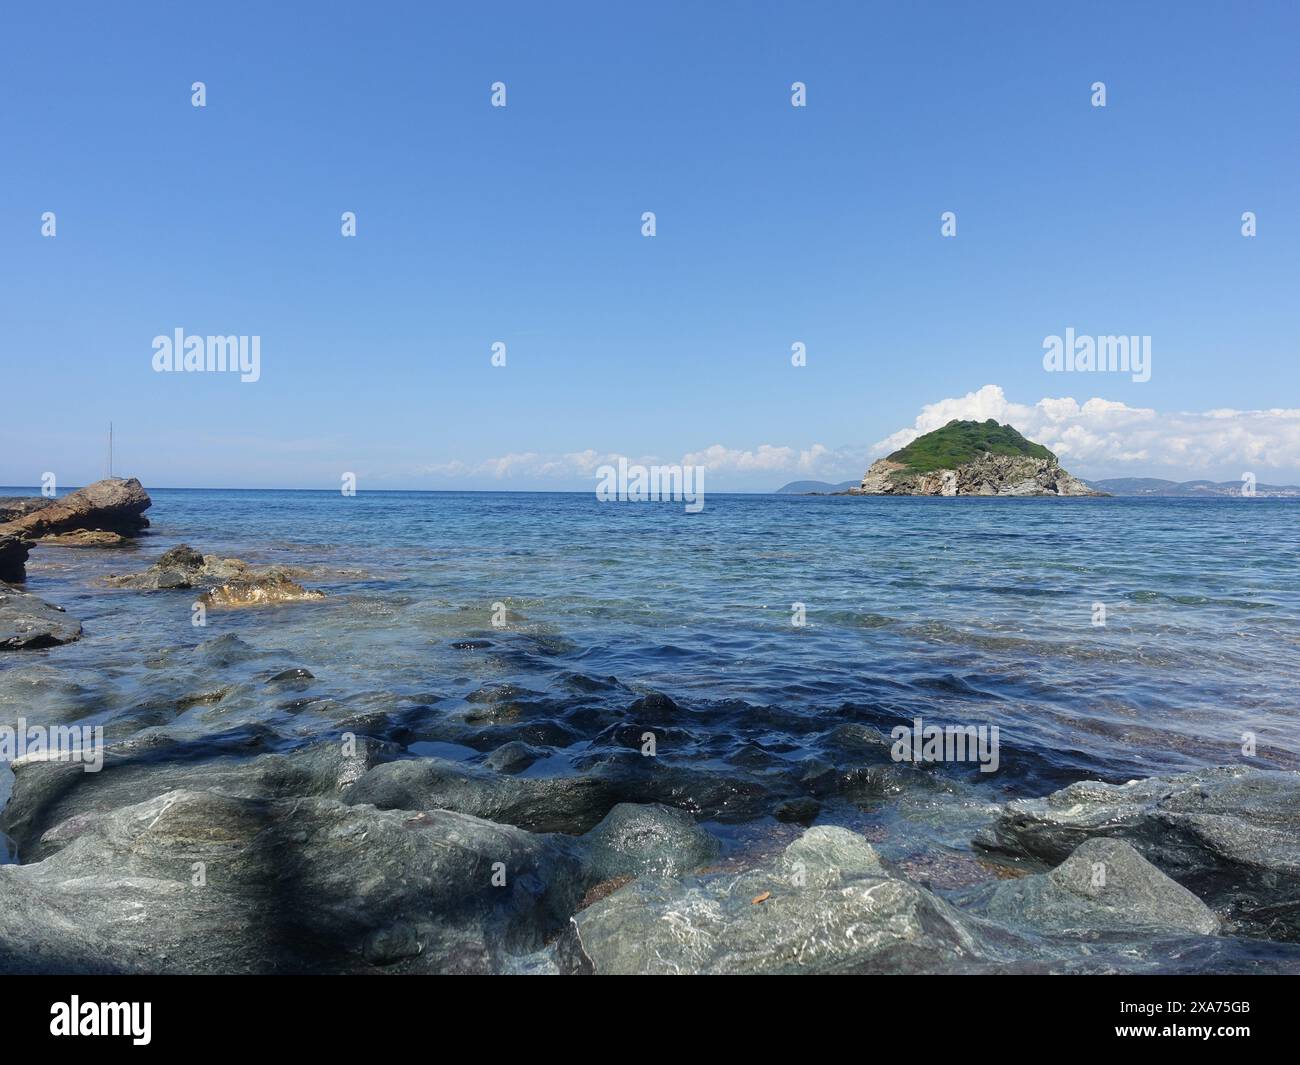 A scenic view of a rocky beach against the sea on a sunny day Stock Photo